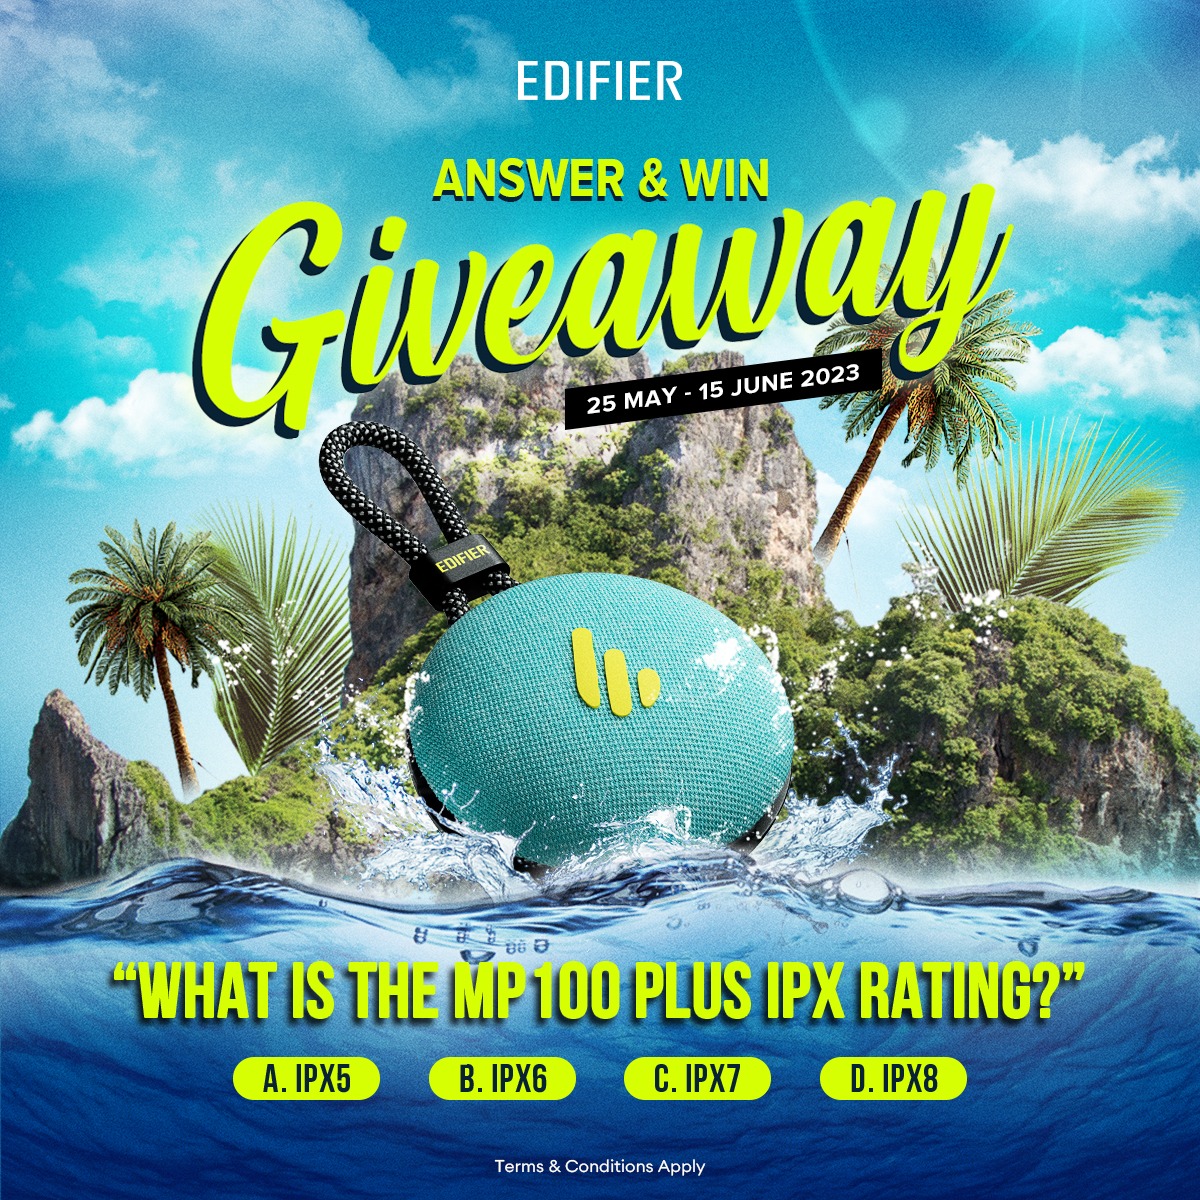 📷📷Get Your Summer Groove On!
📷Answer & Win giveaway for 1 LUCKY WINNER!📷 We are giving away this Edifier MP100 Plus Portable Speaker and Elevate Your Beach Vibes! 📷📷

#Edifan #Edifier #EdifierMalaysia #giveaway #free #mp100plus #Portable #summer #readyforsummer #beachvibes